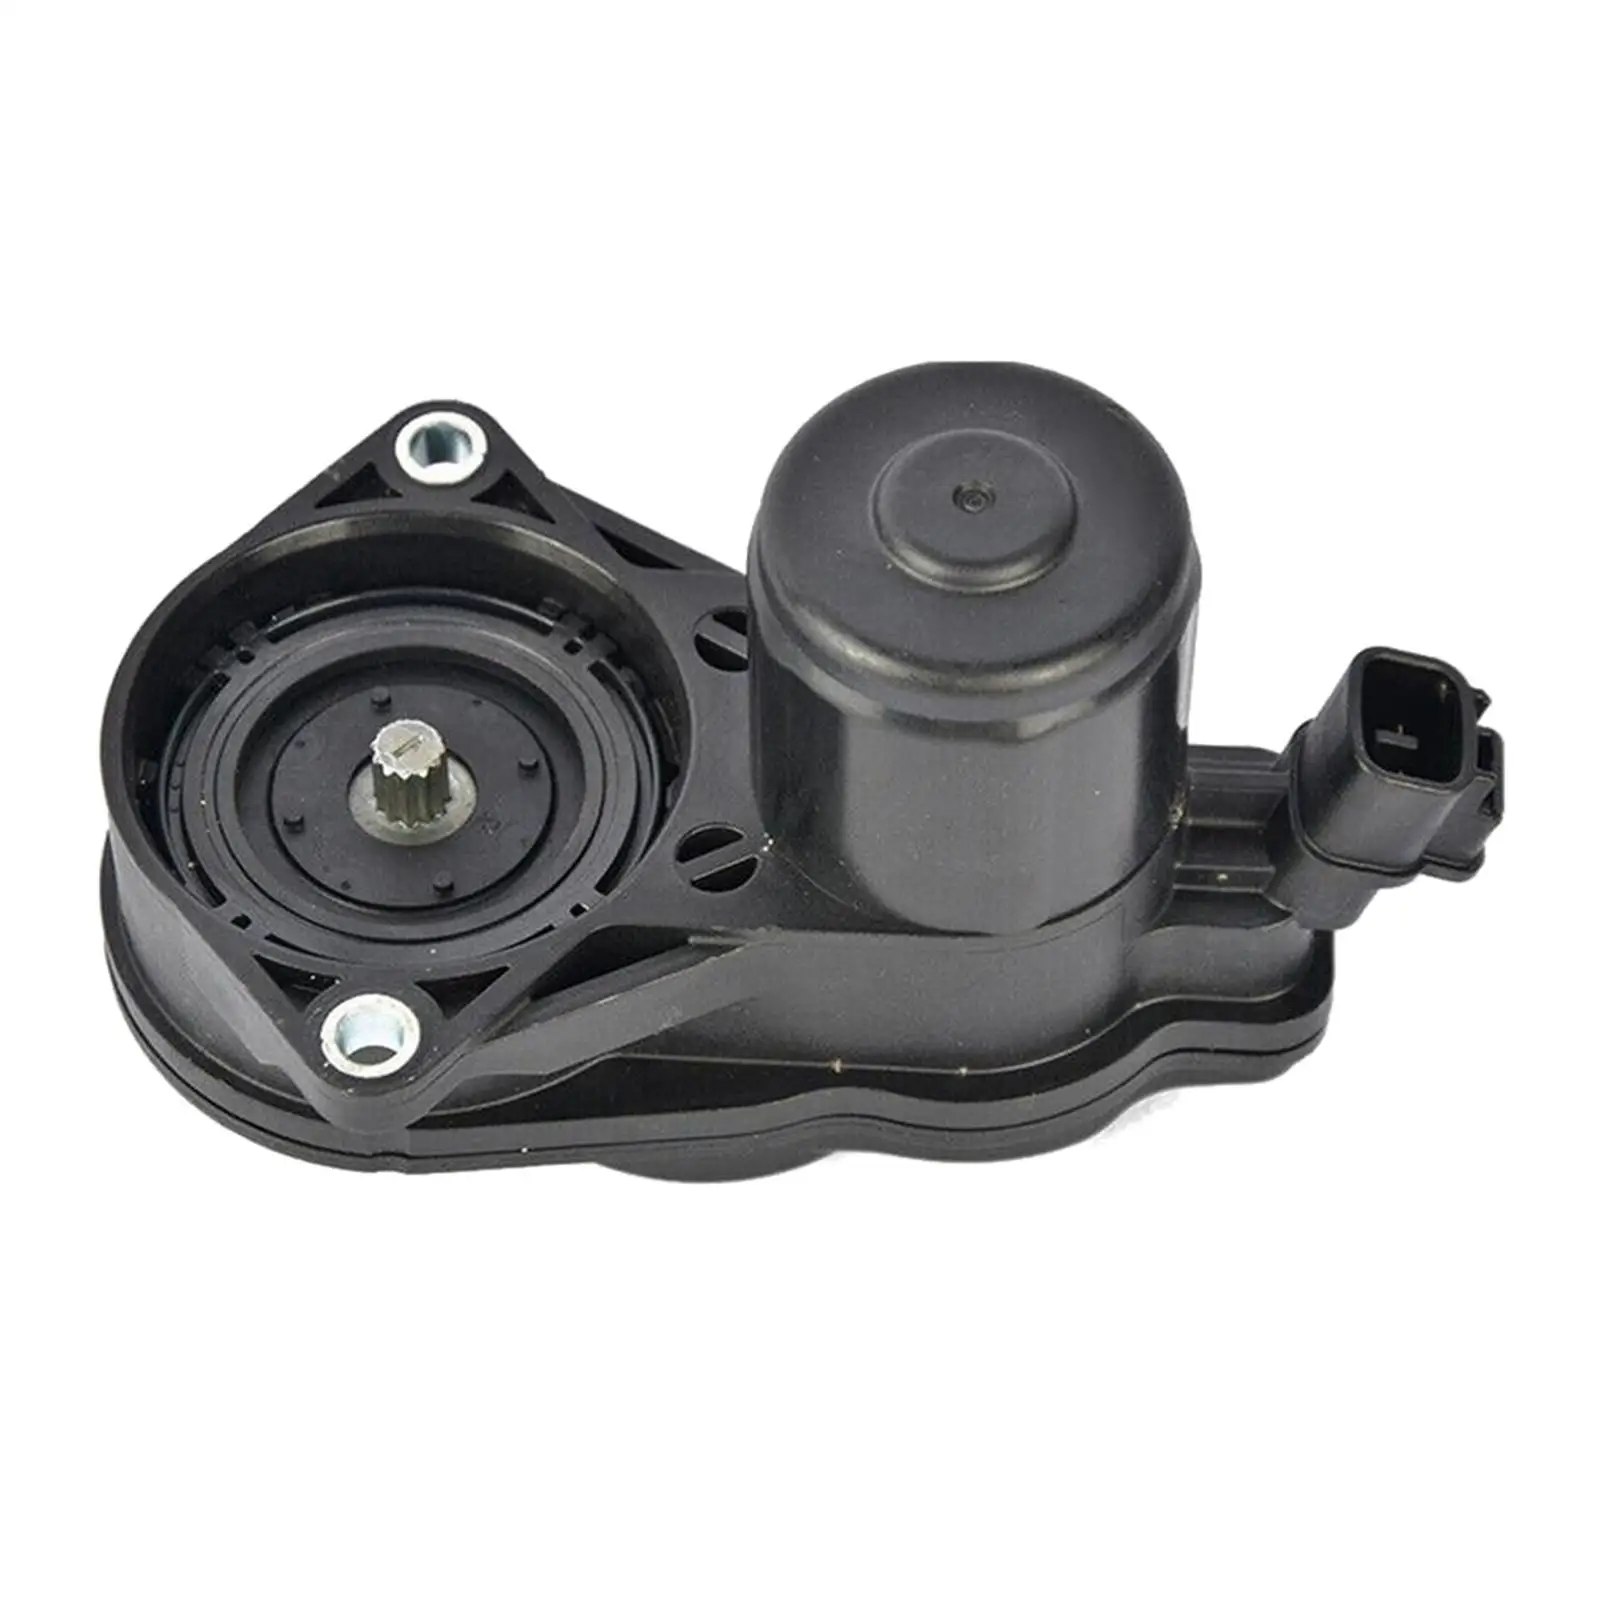 Parking Brake Actuator Assembly Replaces 46310-33010 Car Accessories for Toyota for highlander for camry for sienna Modification